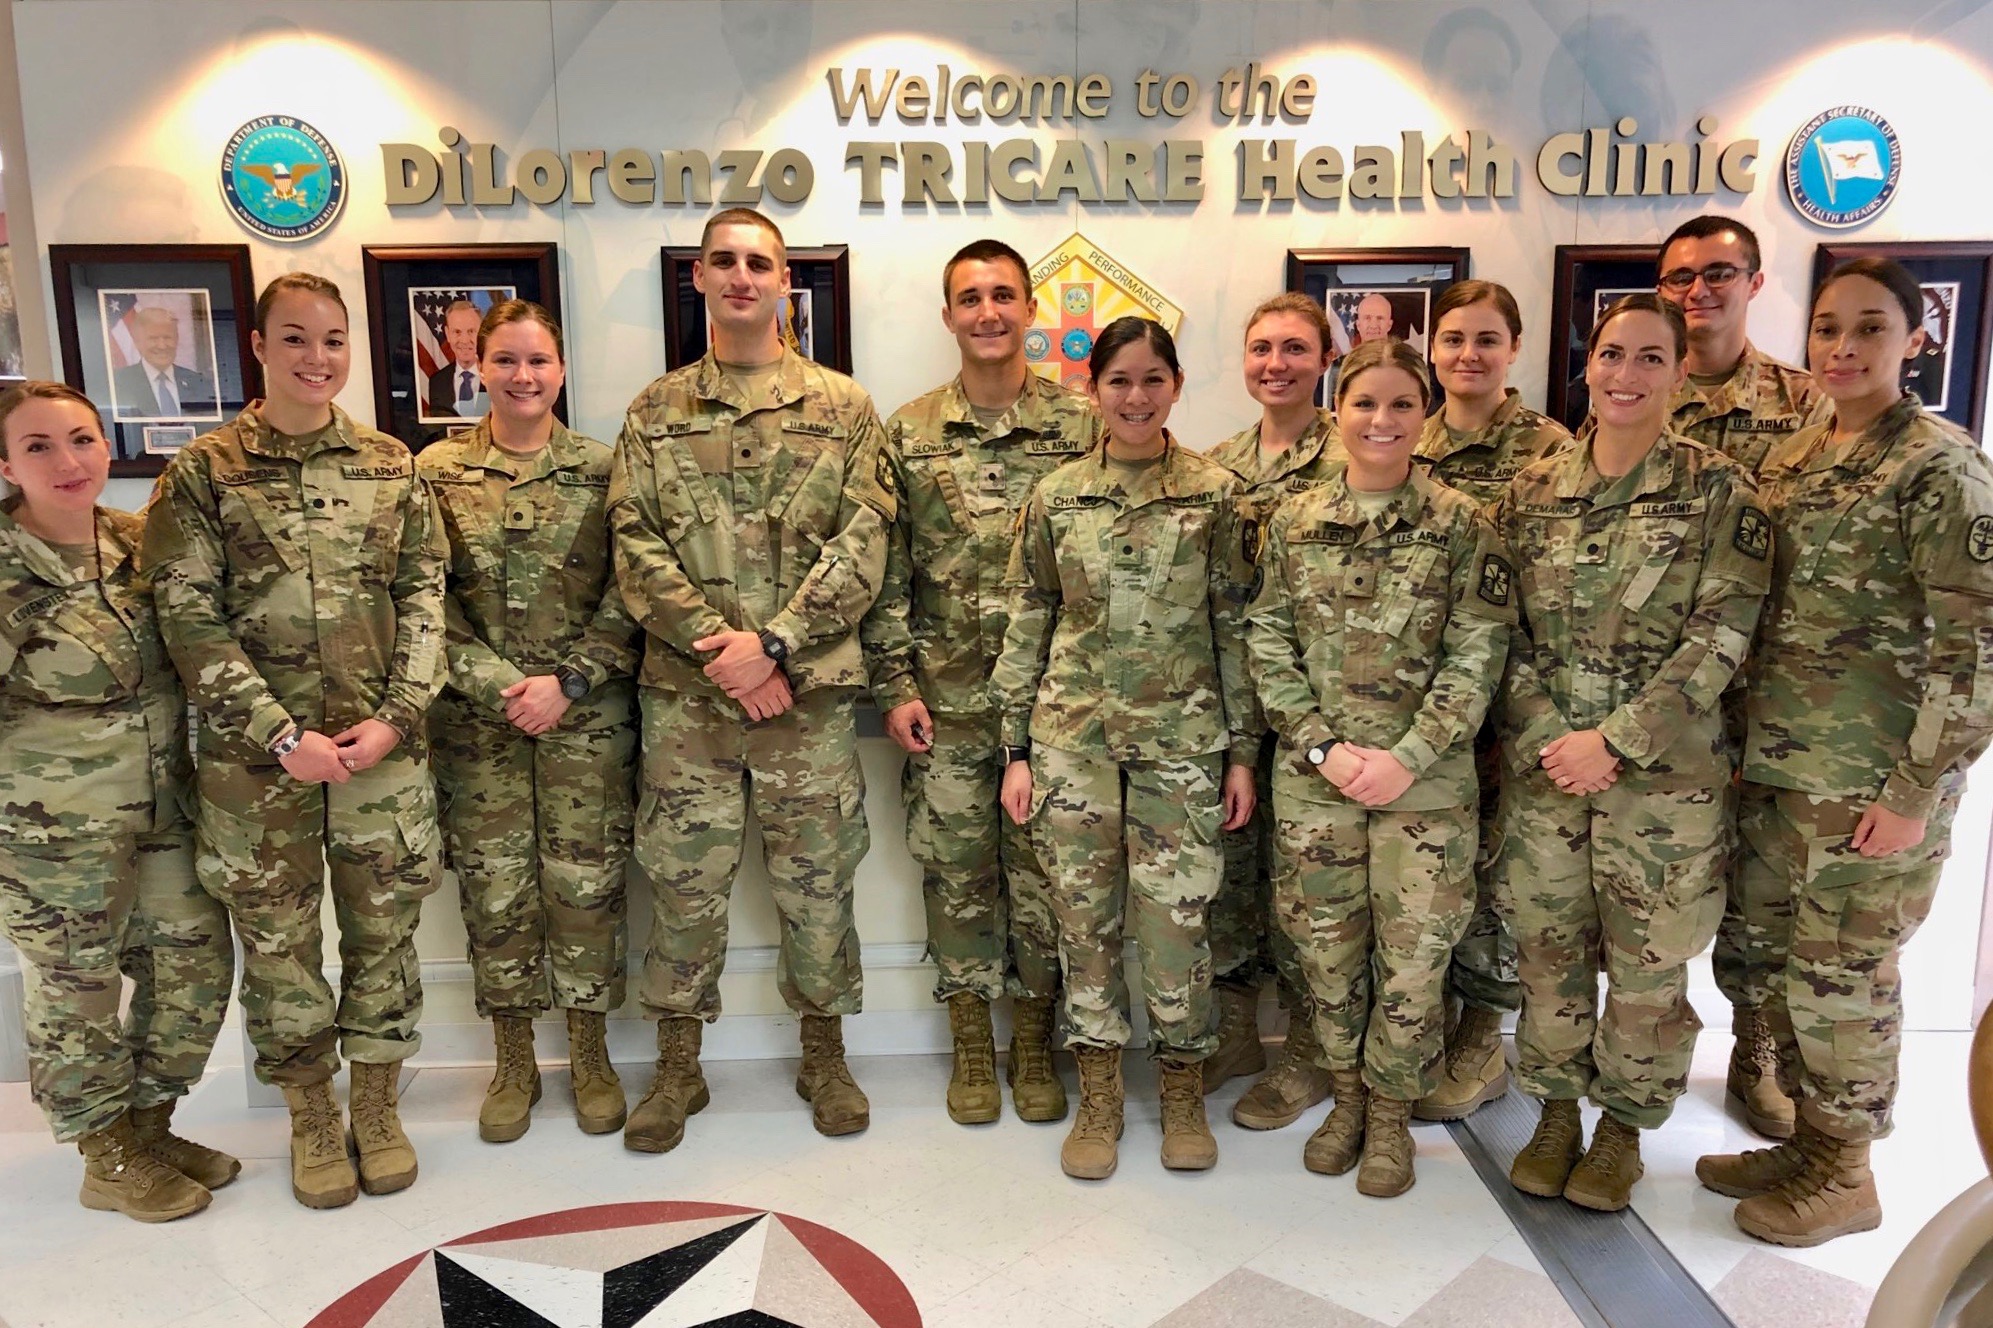 Nursing senior Michelle Demarais, third from right, poses with fellow students at Walter Reed National Military Medical Center in Bethesda, Maryland.